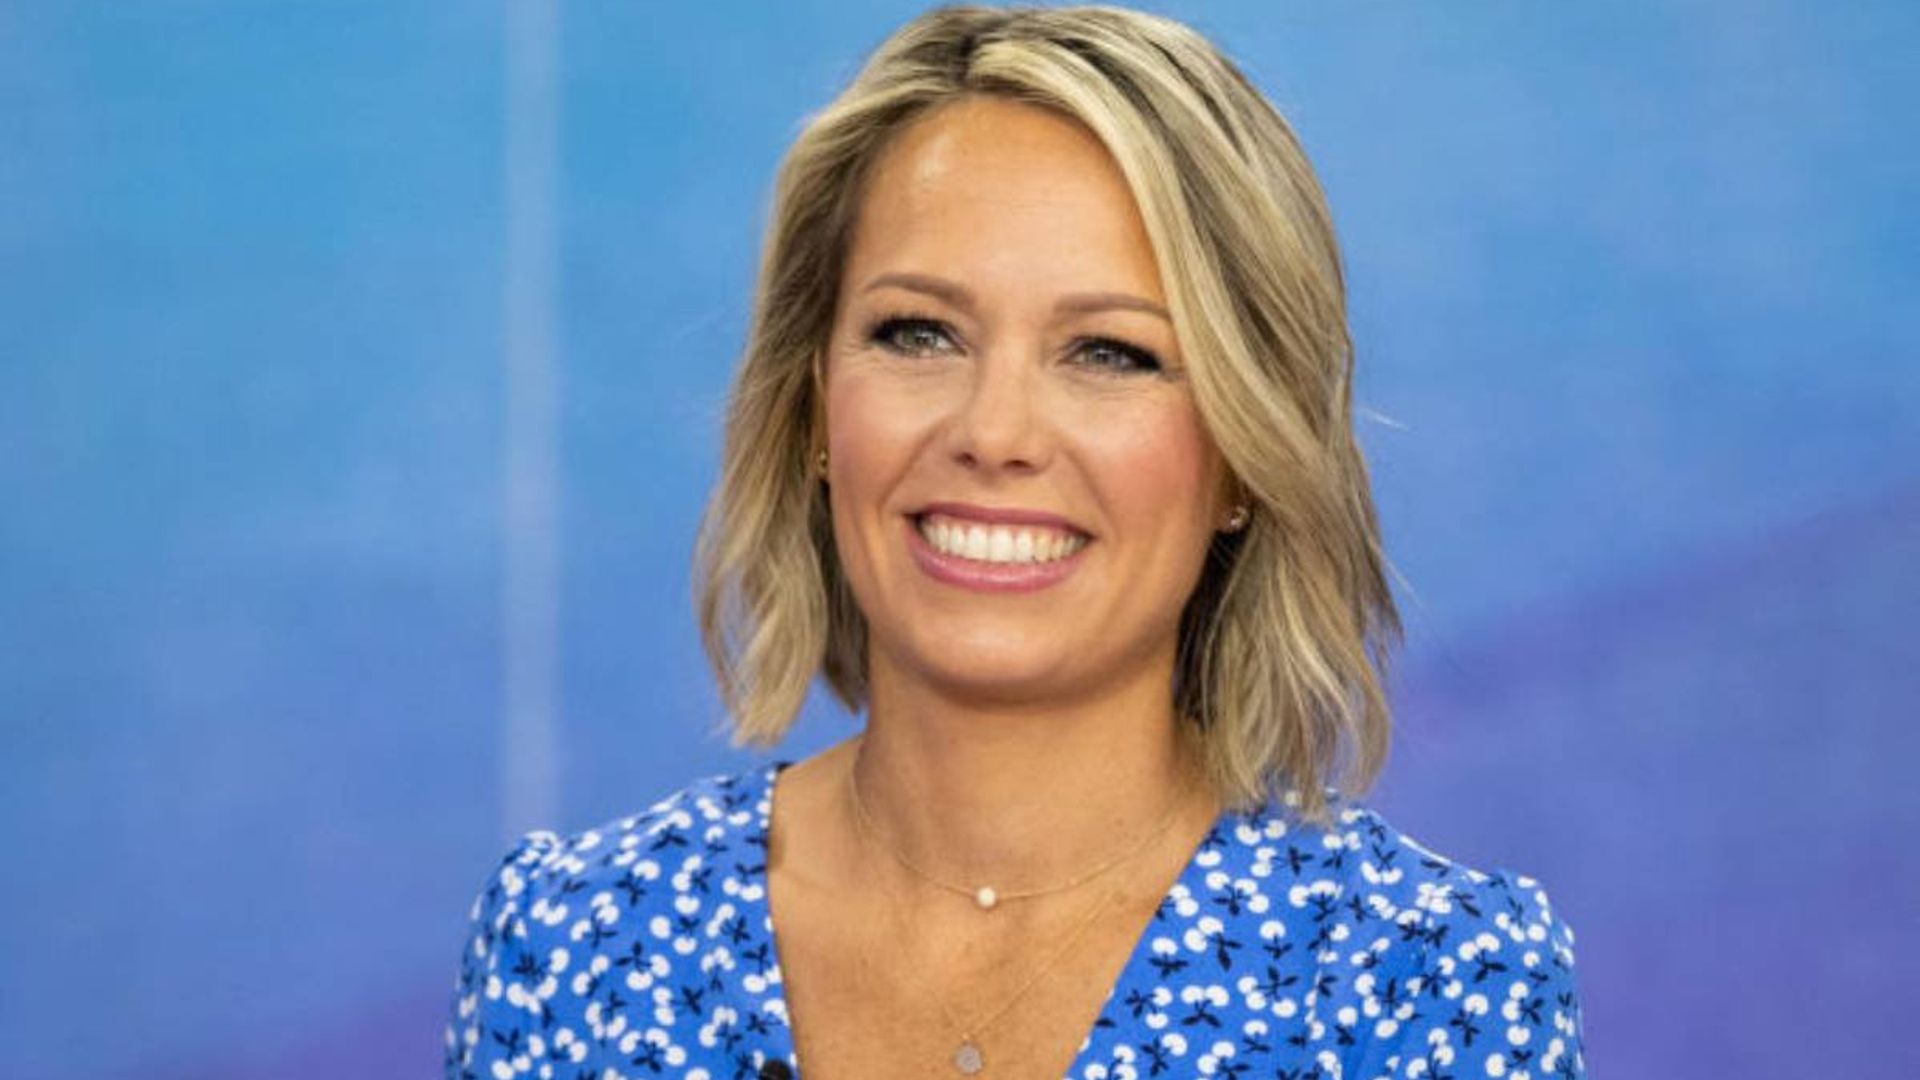 Dylan Dreyer is glowing as she shares very happy update on Today